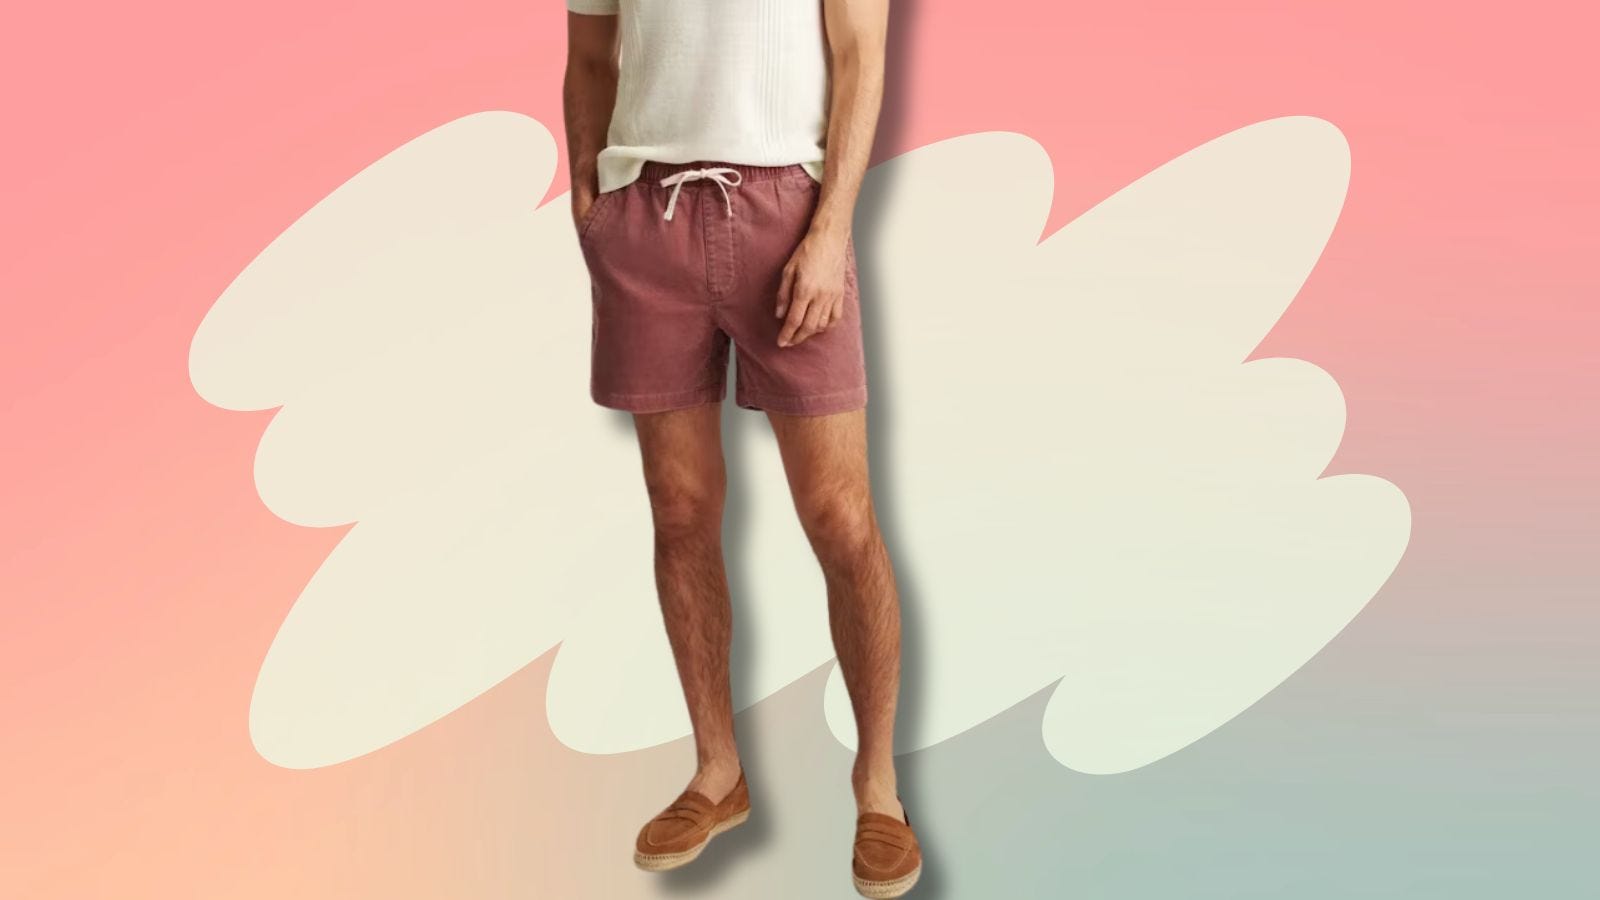 image of lower torso and legs of a man wearing a cream-colored short sleeve shirt with red corduroy drawstring shorts and brown suede espadrilles